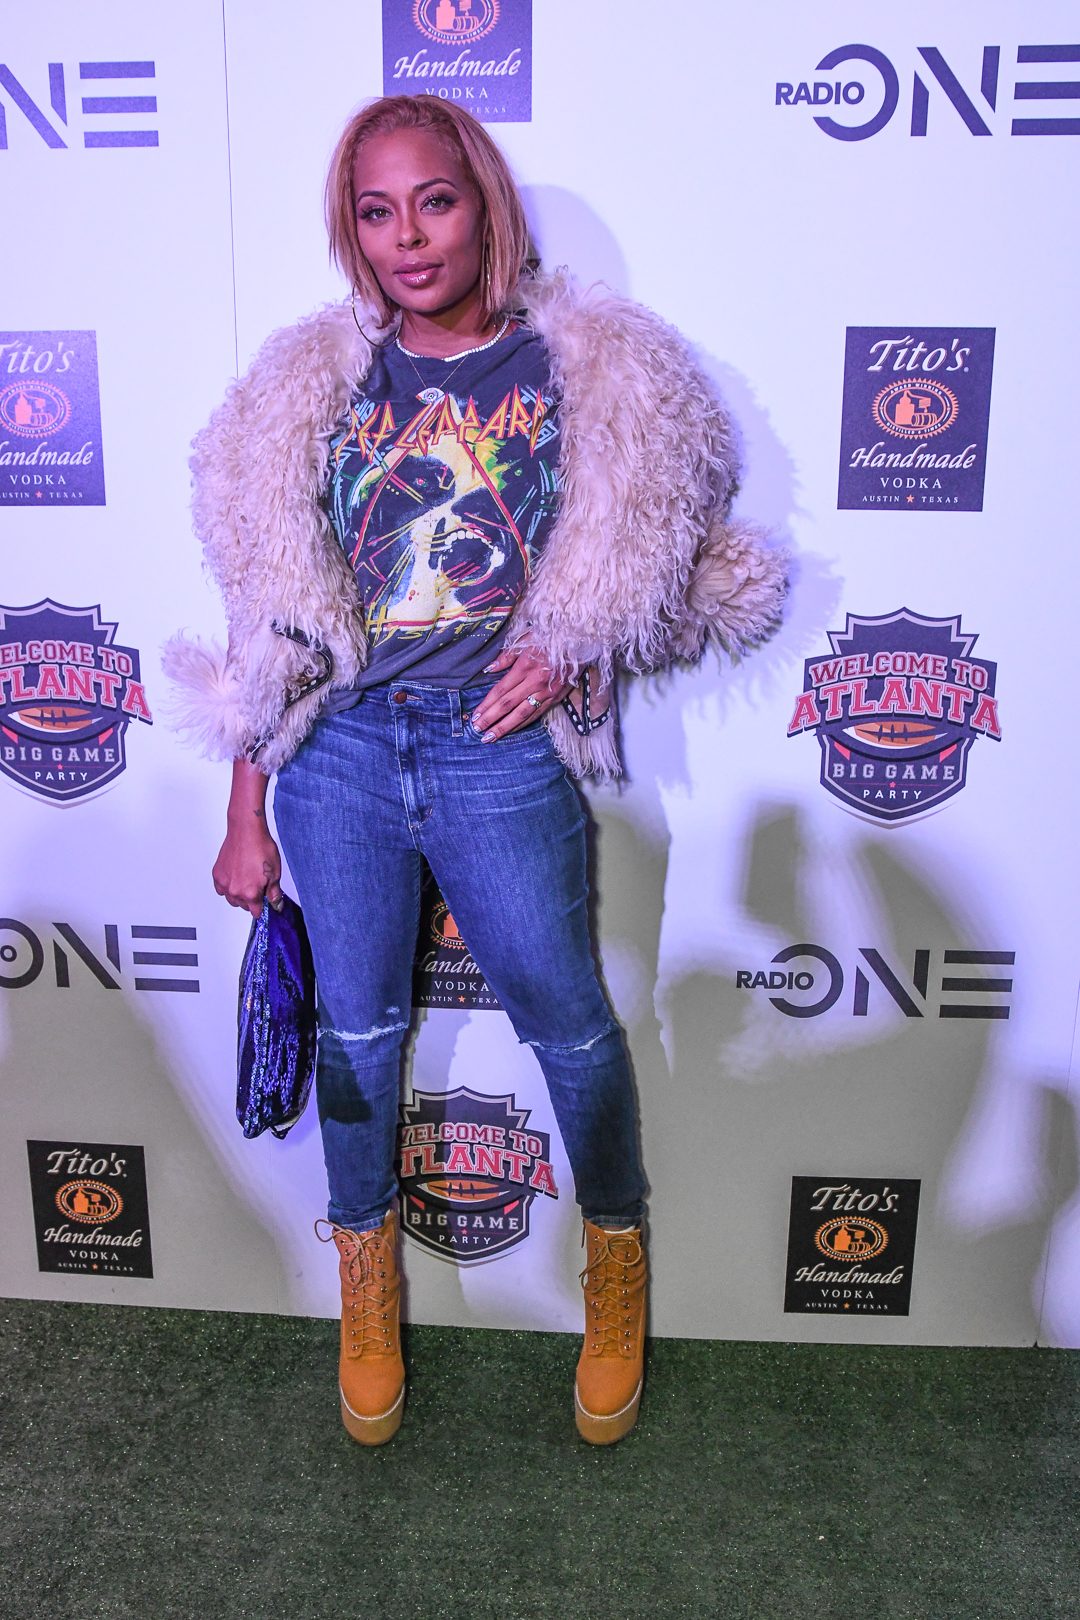 radio one big game party